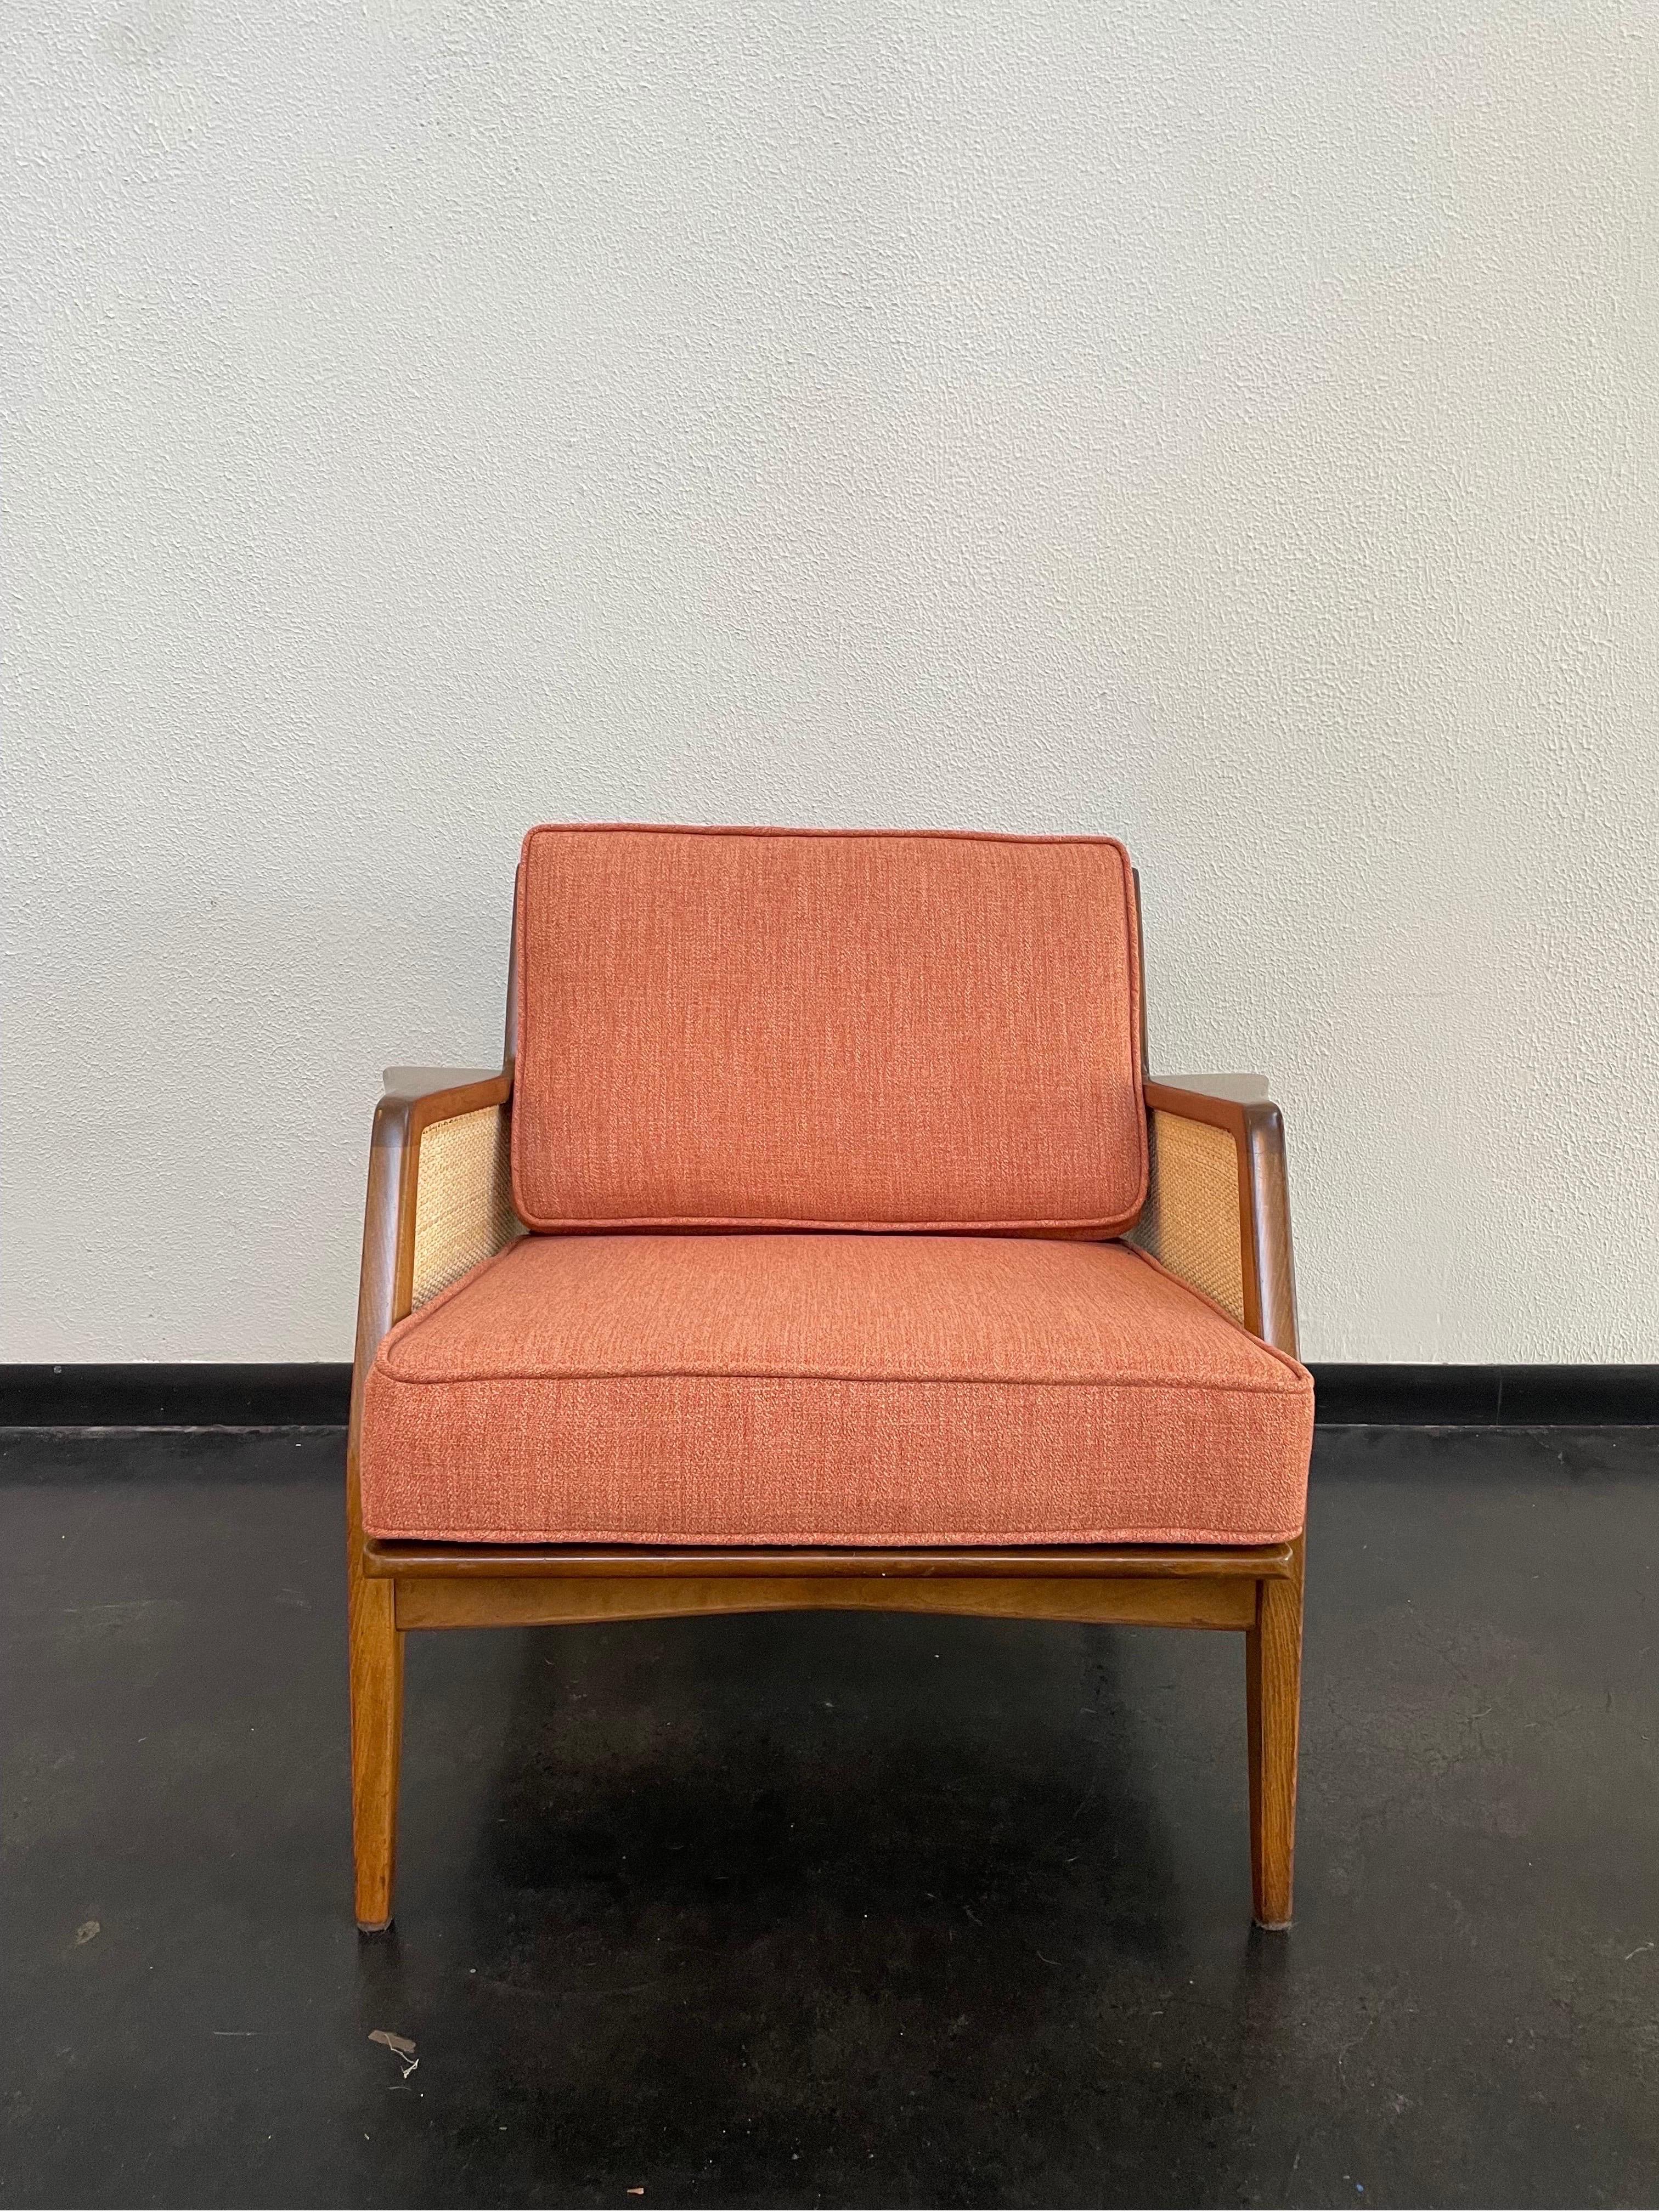 Vintage Mid-Century Modern lounge chair with brand new salmon toned upholstery and new cane panels.